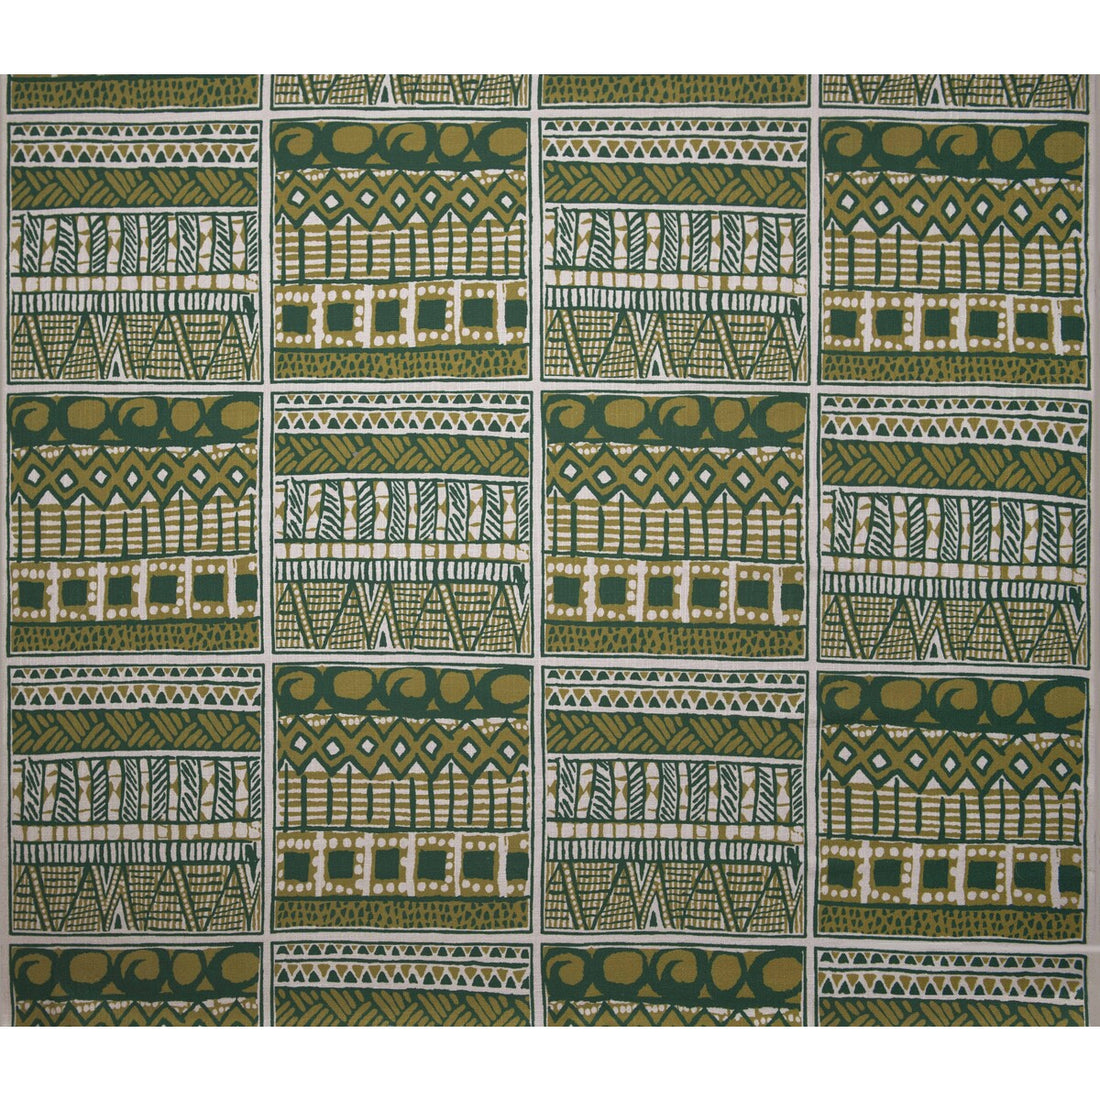 Suajili fabric in verde color - pattern GDT5404.5.0 - by Gaston y Daniela in the Gaston Africalia collection